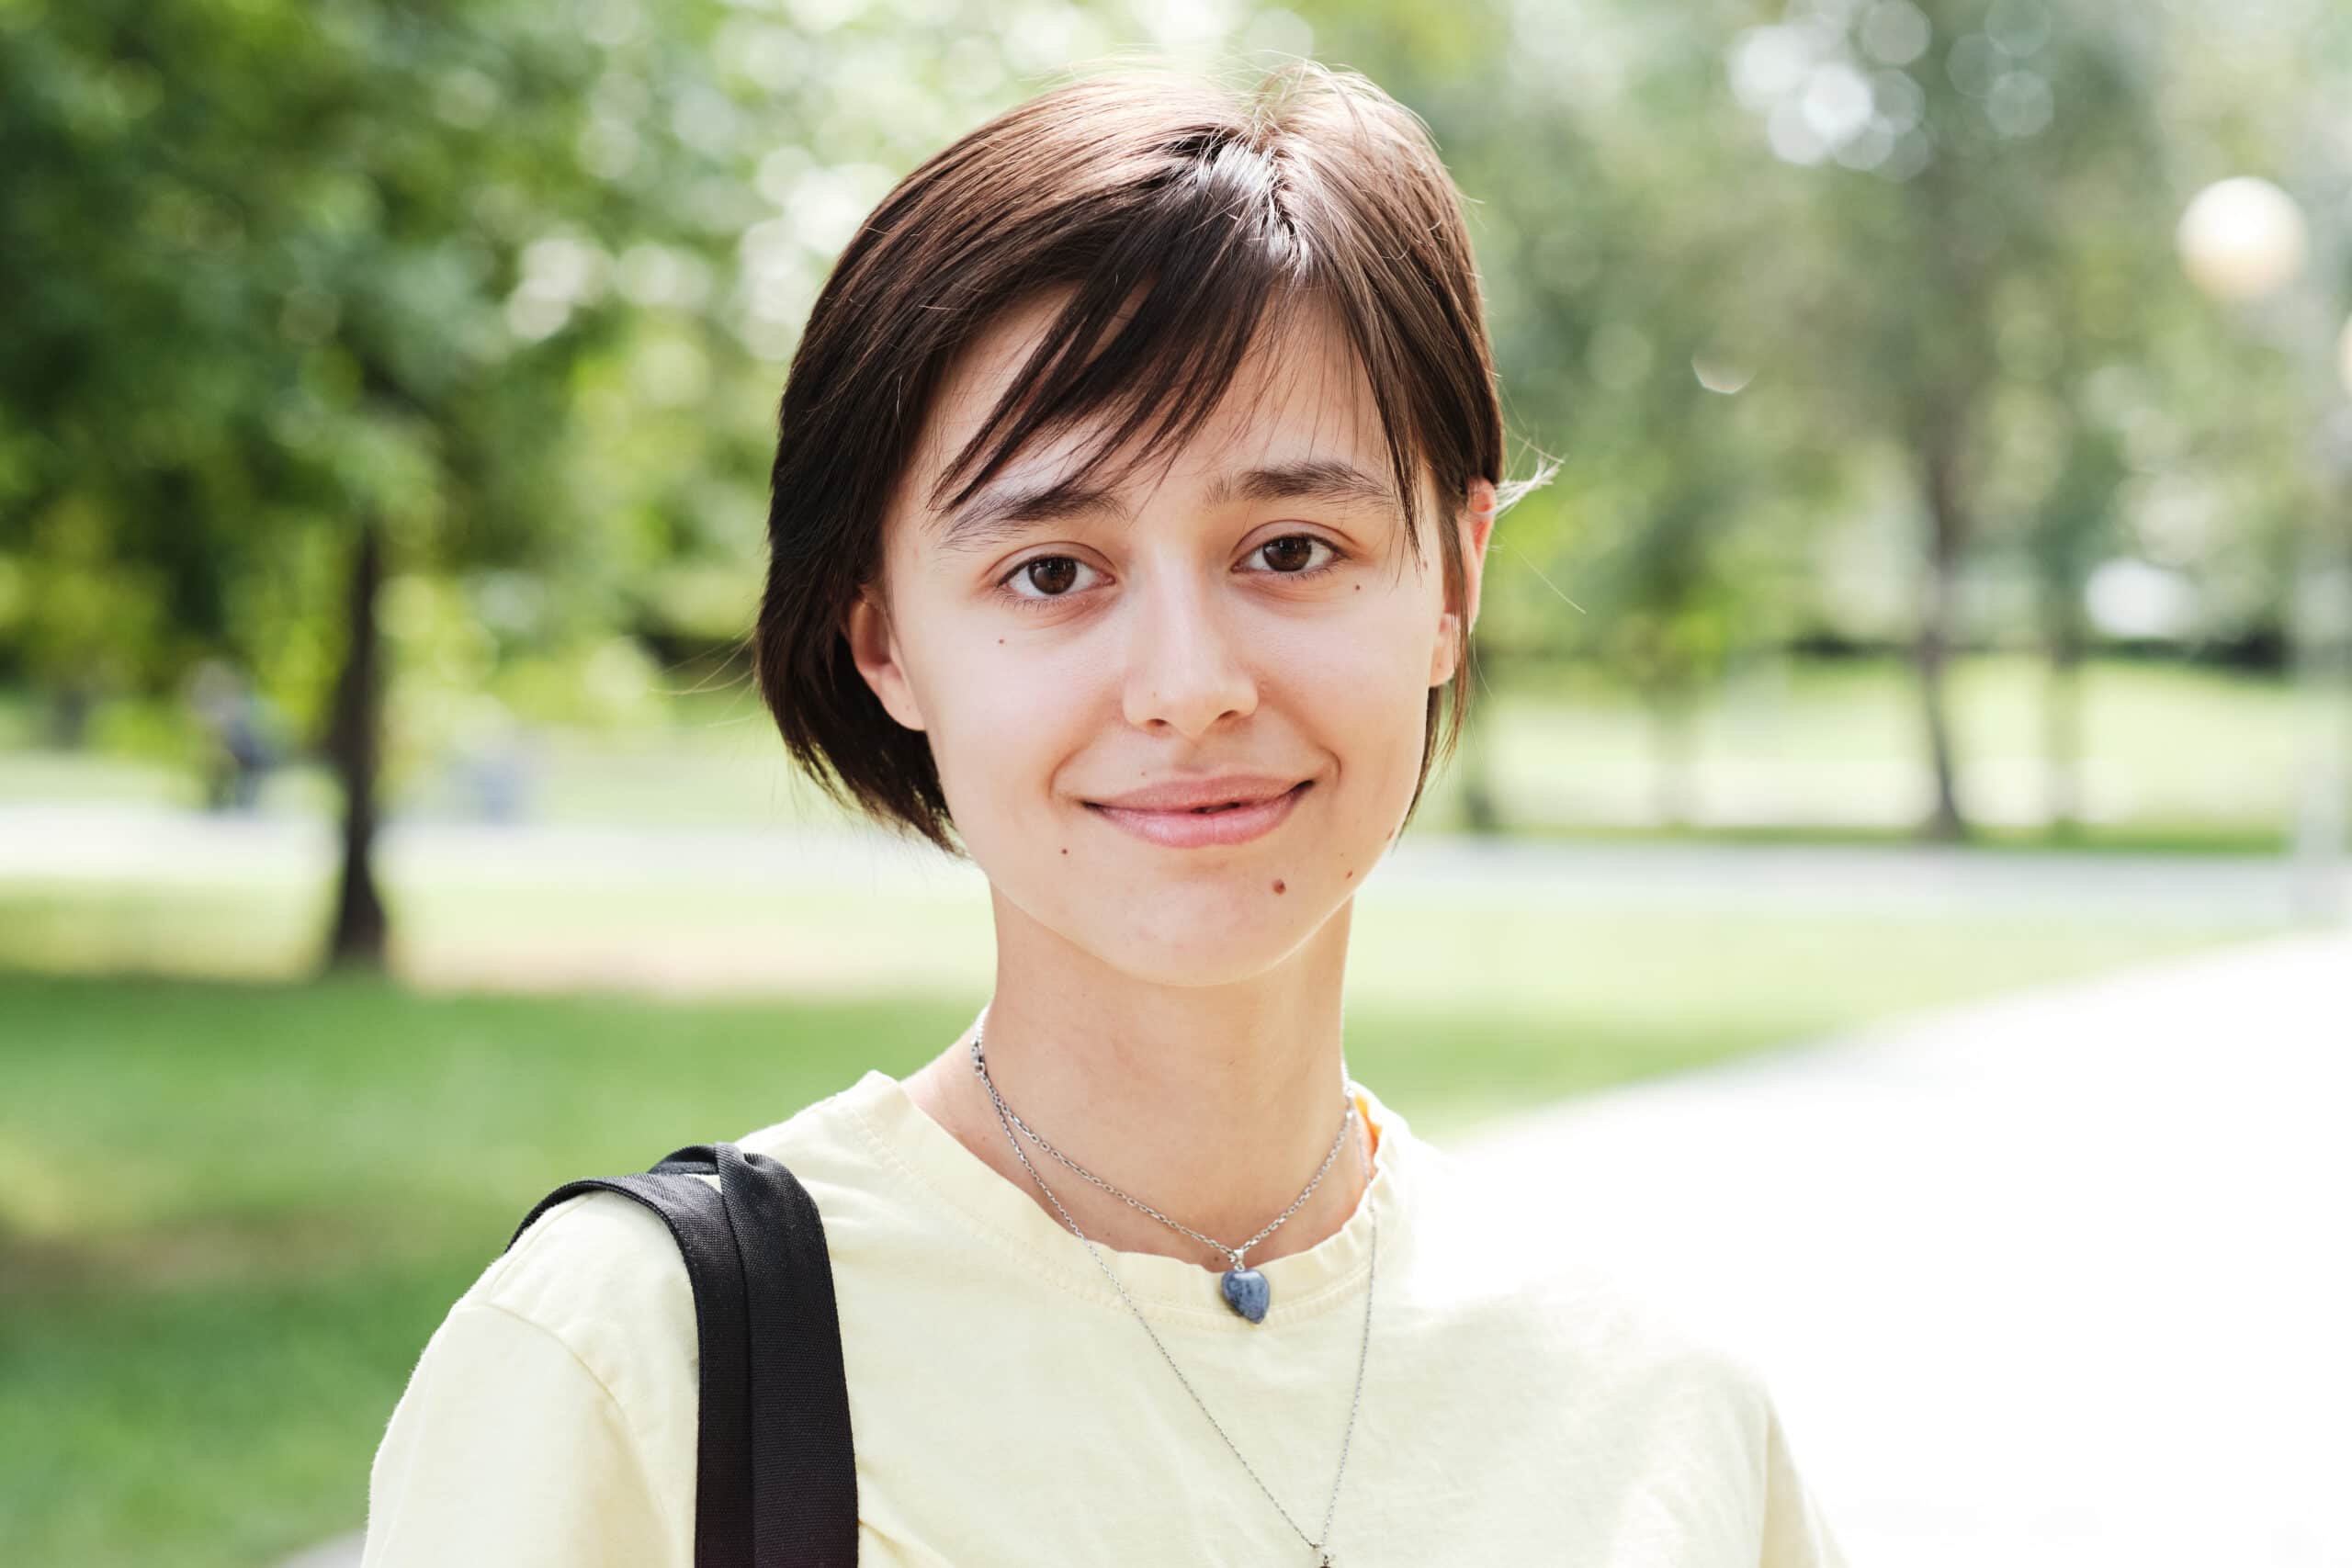 Close-up of a young woman with short hair looking at camera while standing outdoors on a sunny day.